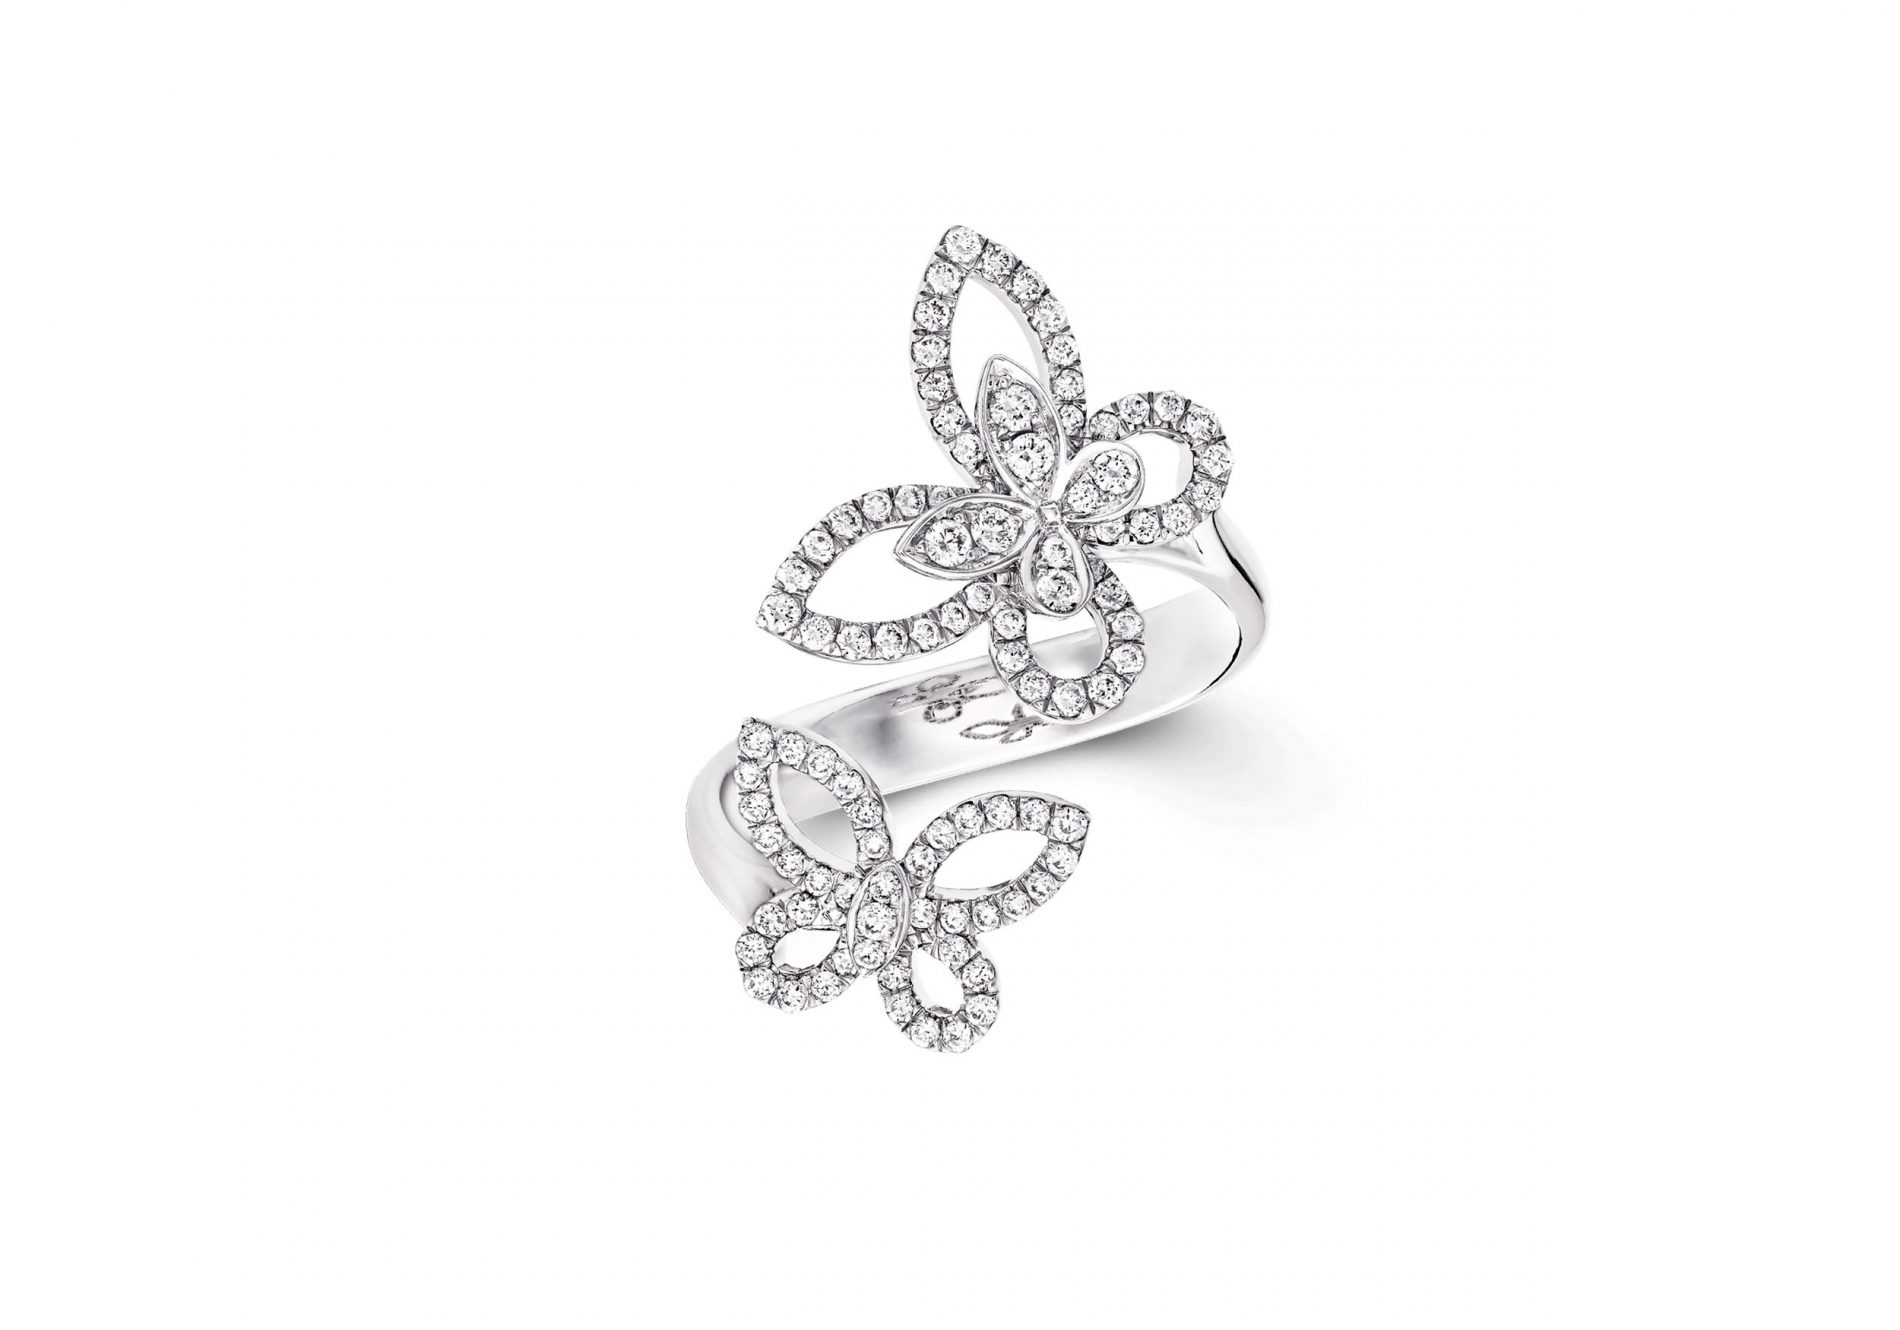 A Graff butterfly silhouette ring